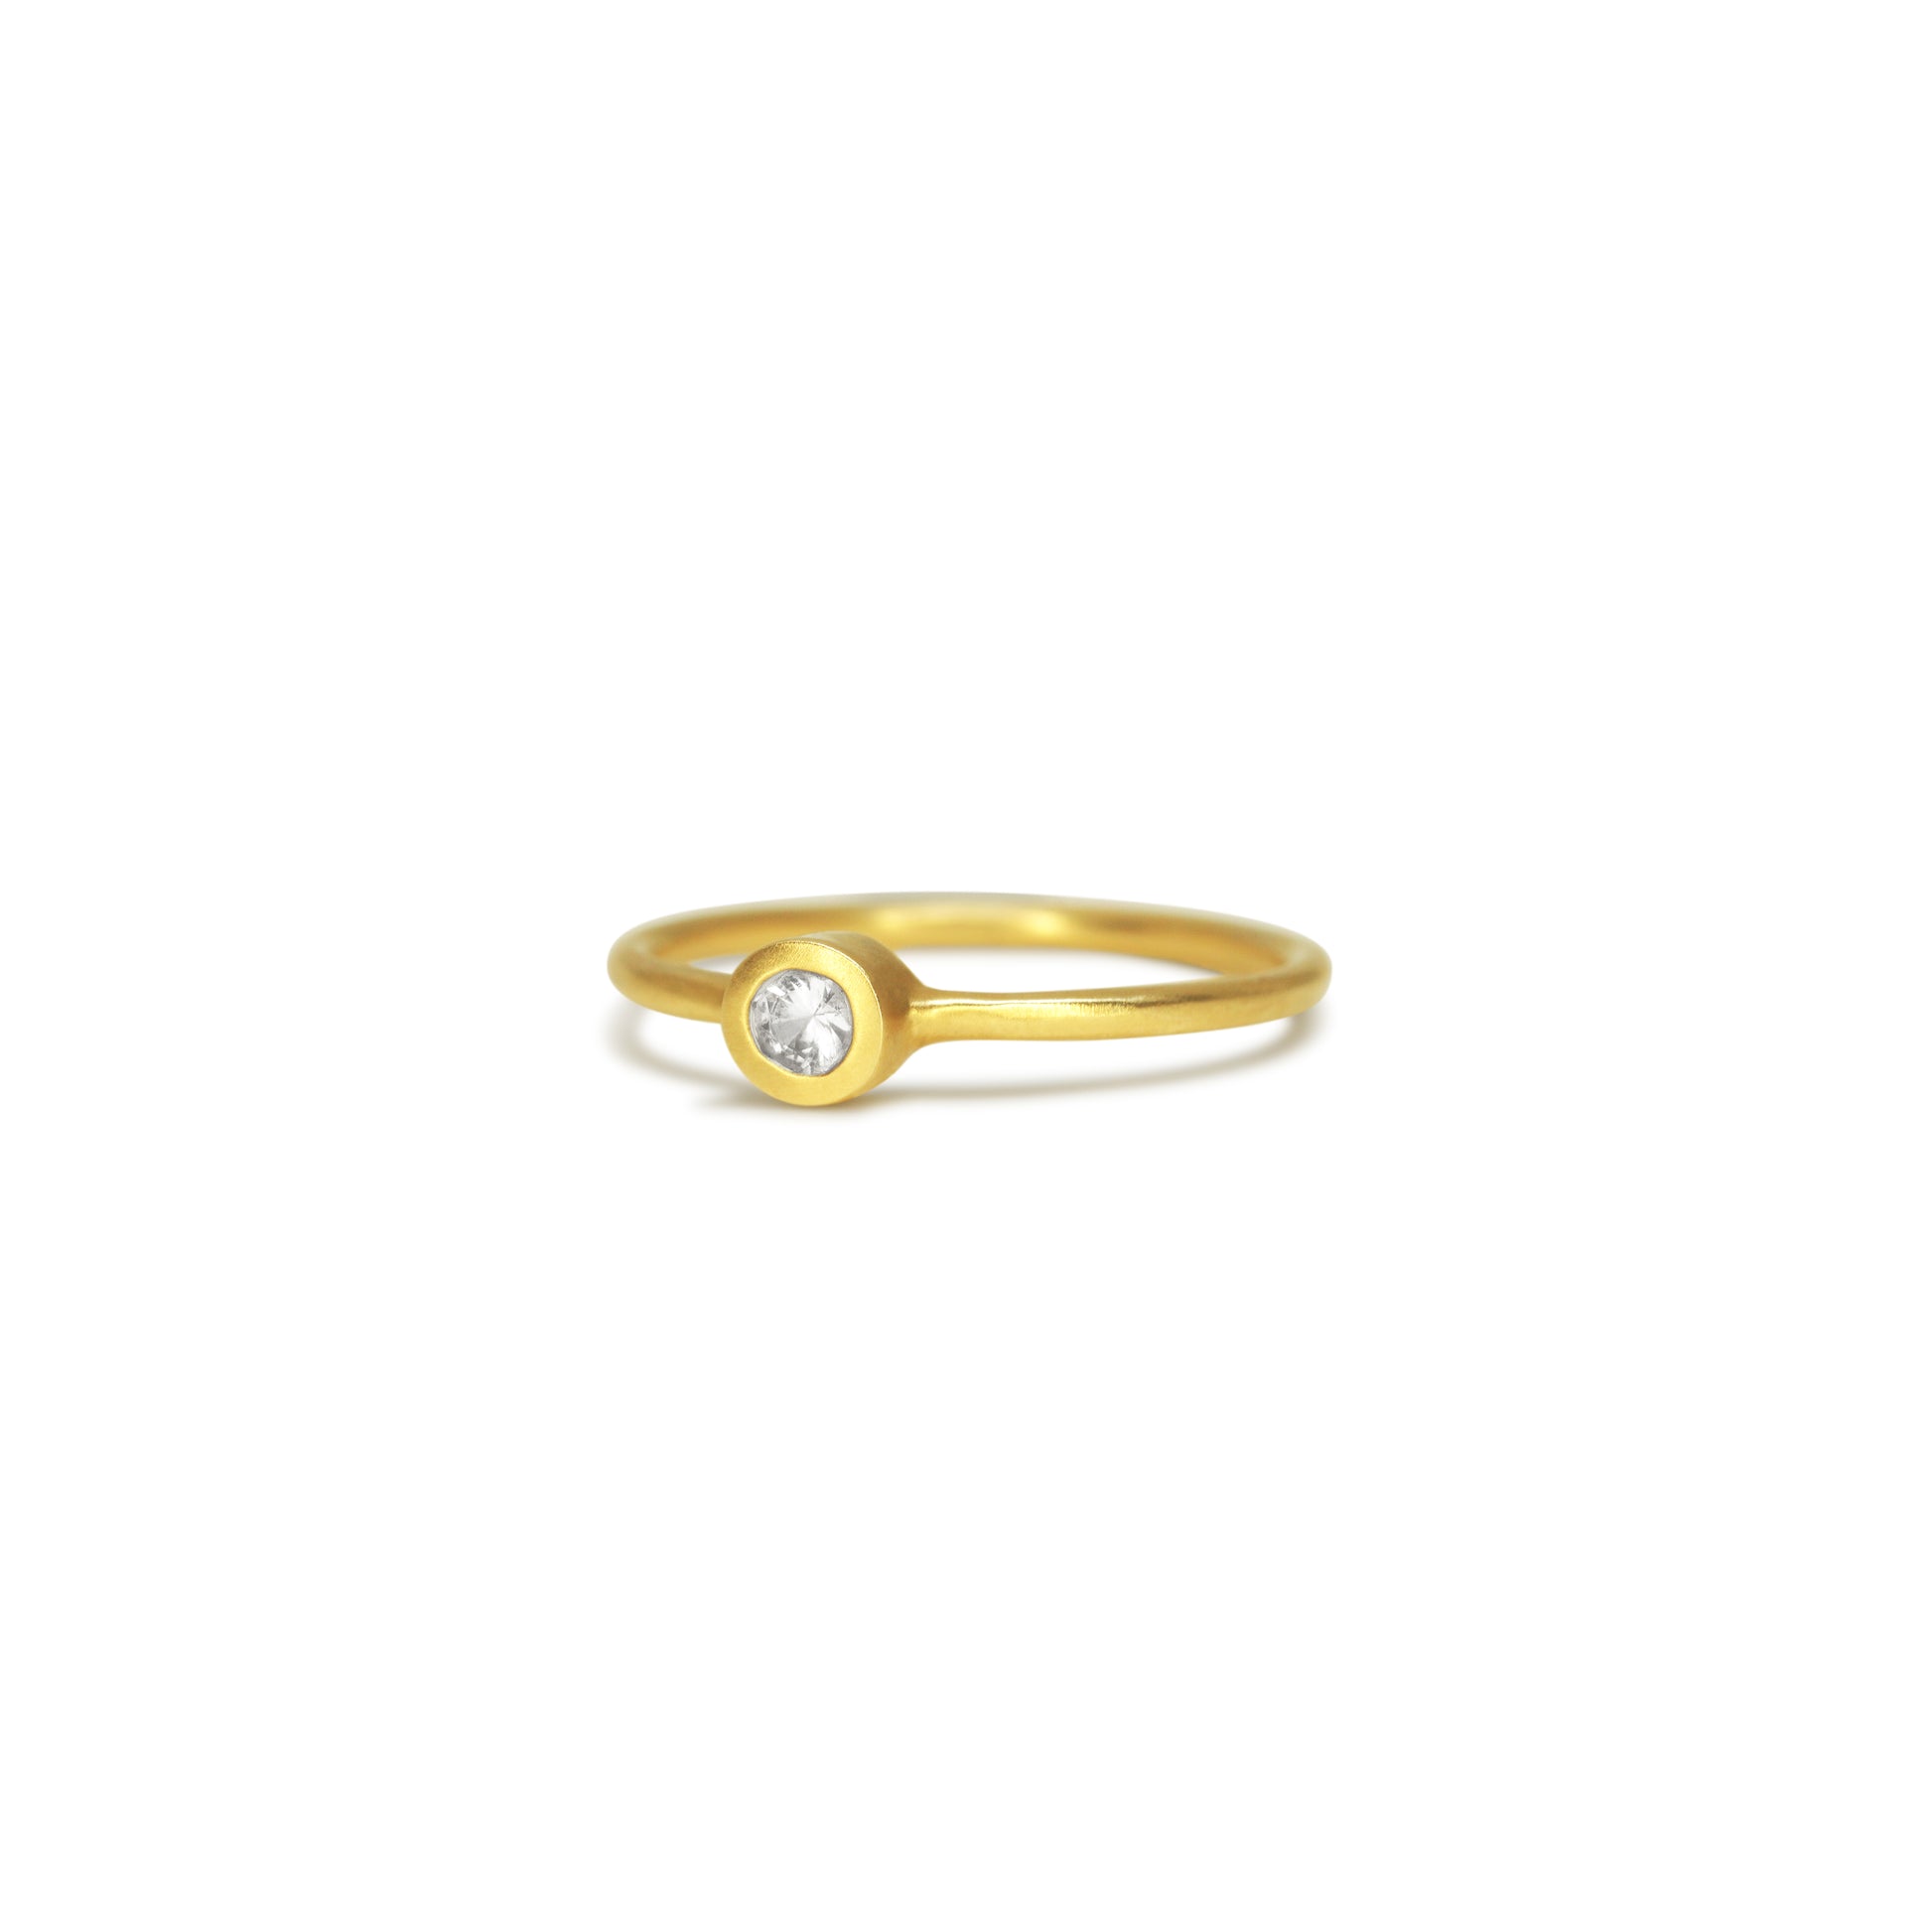 Details  Indulge in the timeless elegance of our Single Diamond Ring. This sparkling centerpiece features exquisite craftsmanship that will captivate your heart and dazzle on your finger. Elevate your style and make a statement with this stunning piece of jewelry.  3mm Round White Diamond Round Band 14k Yellow Gold Satin Finish WxT: 1.45mm